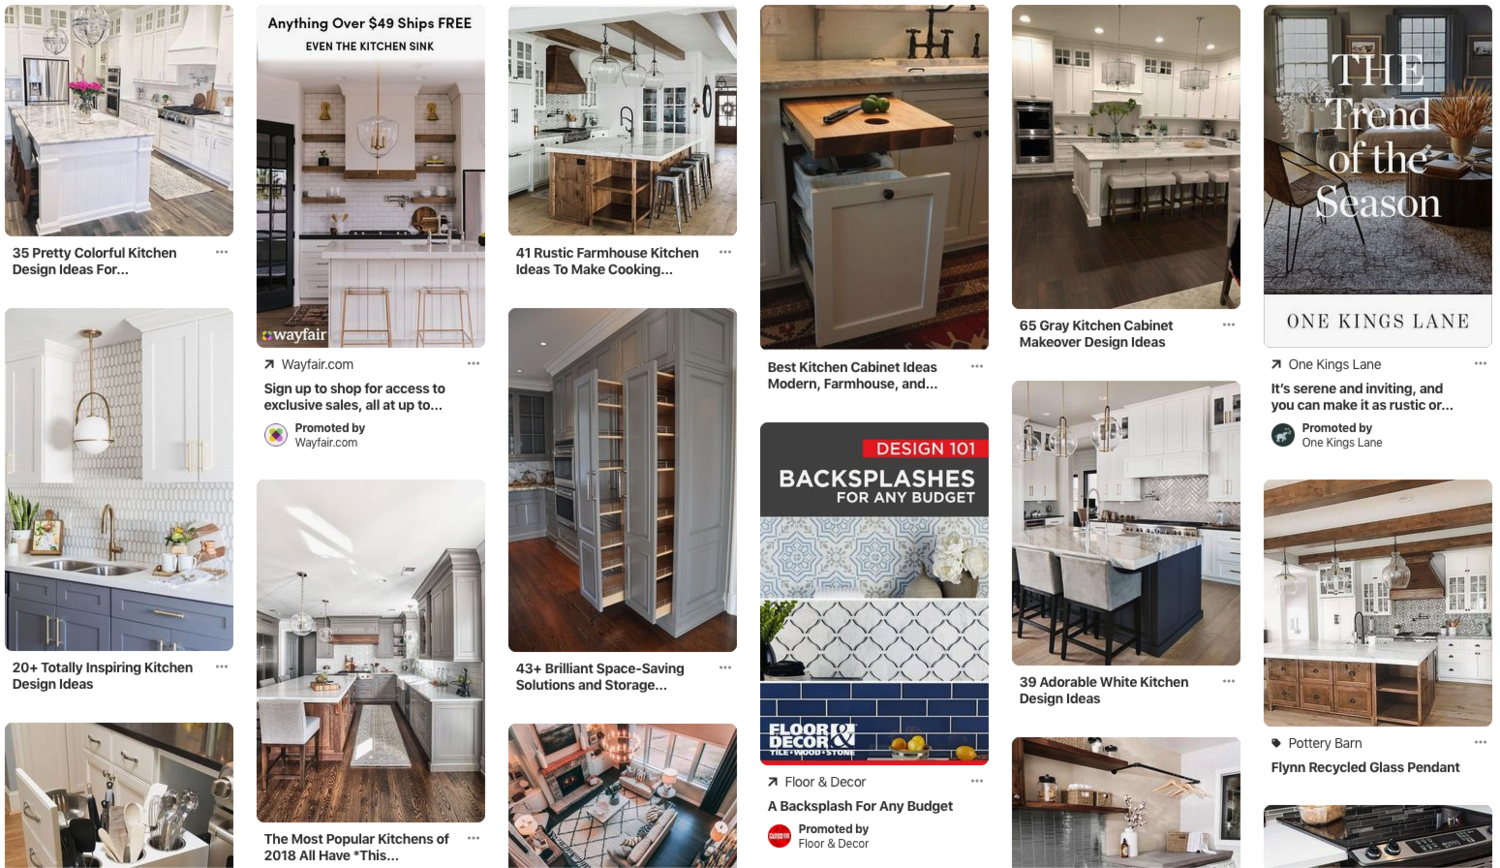 How To Use Pinterest For Interior Design Inspiration